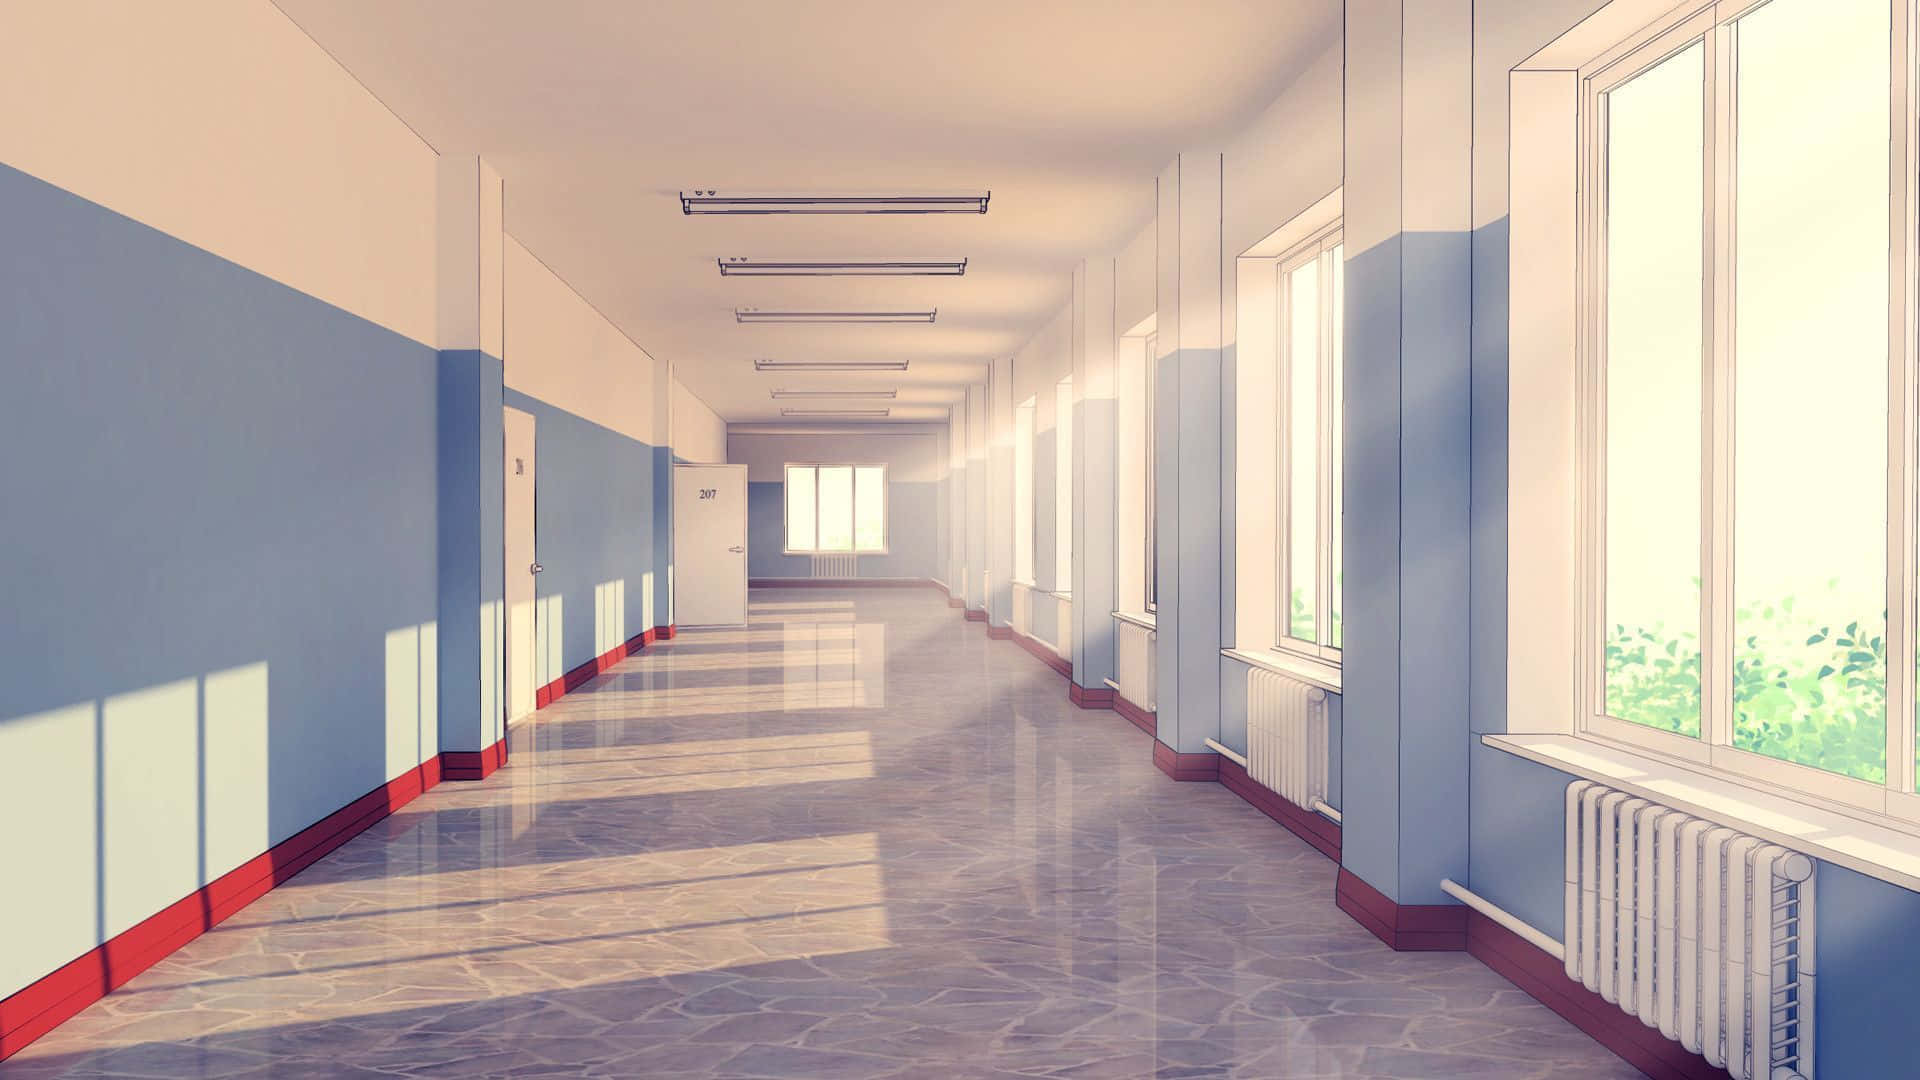 A Hallway With Blue Walls And White Radiators